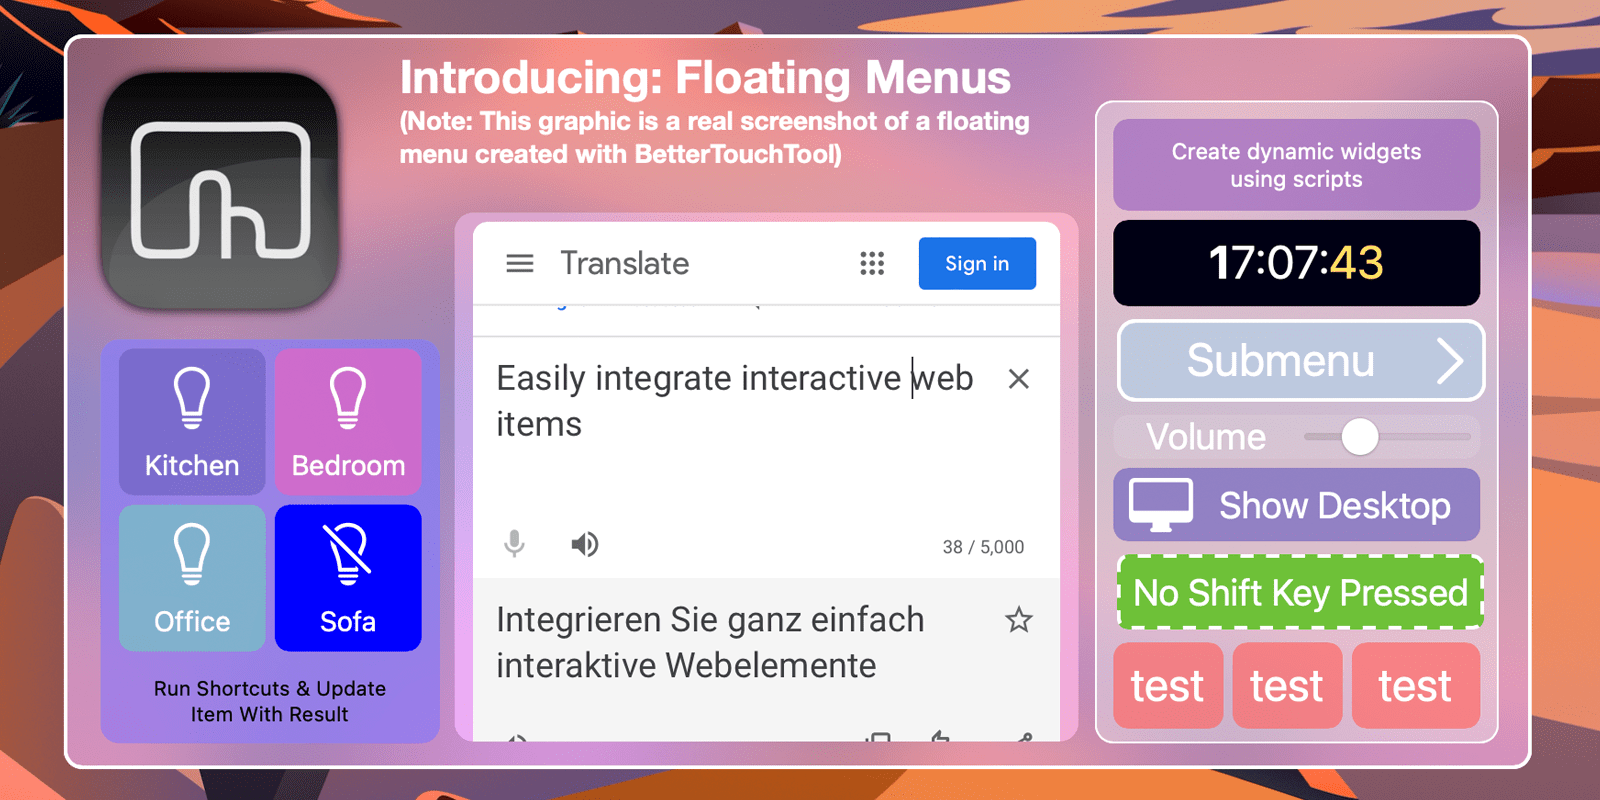 BetterTouchTool: Introducing Floating